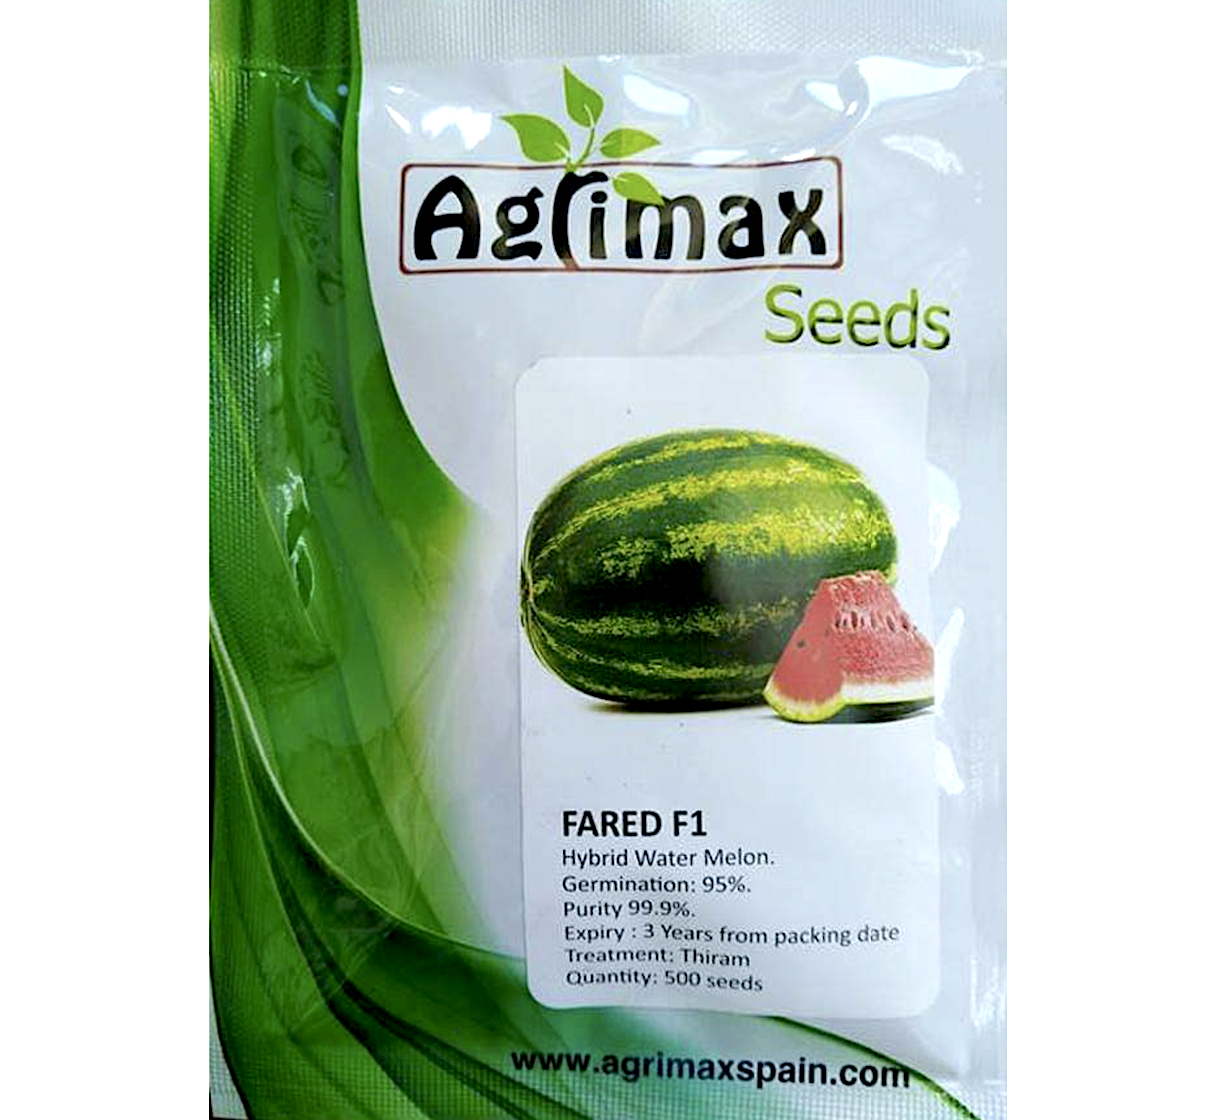 Watermelon Fruit Seeds "Fared F1 Hybrid" by Agrimax